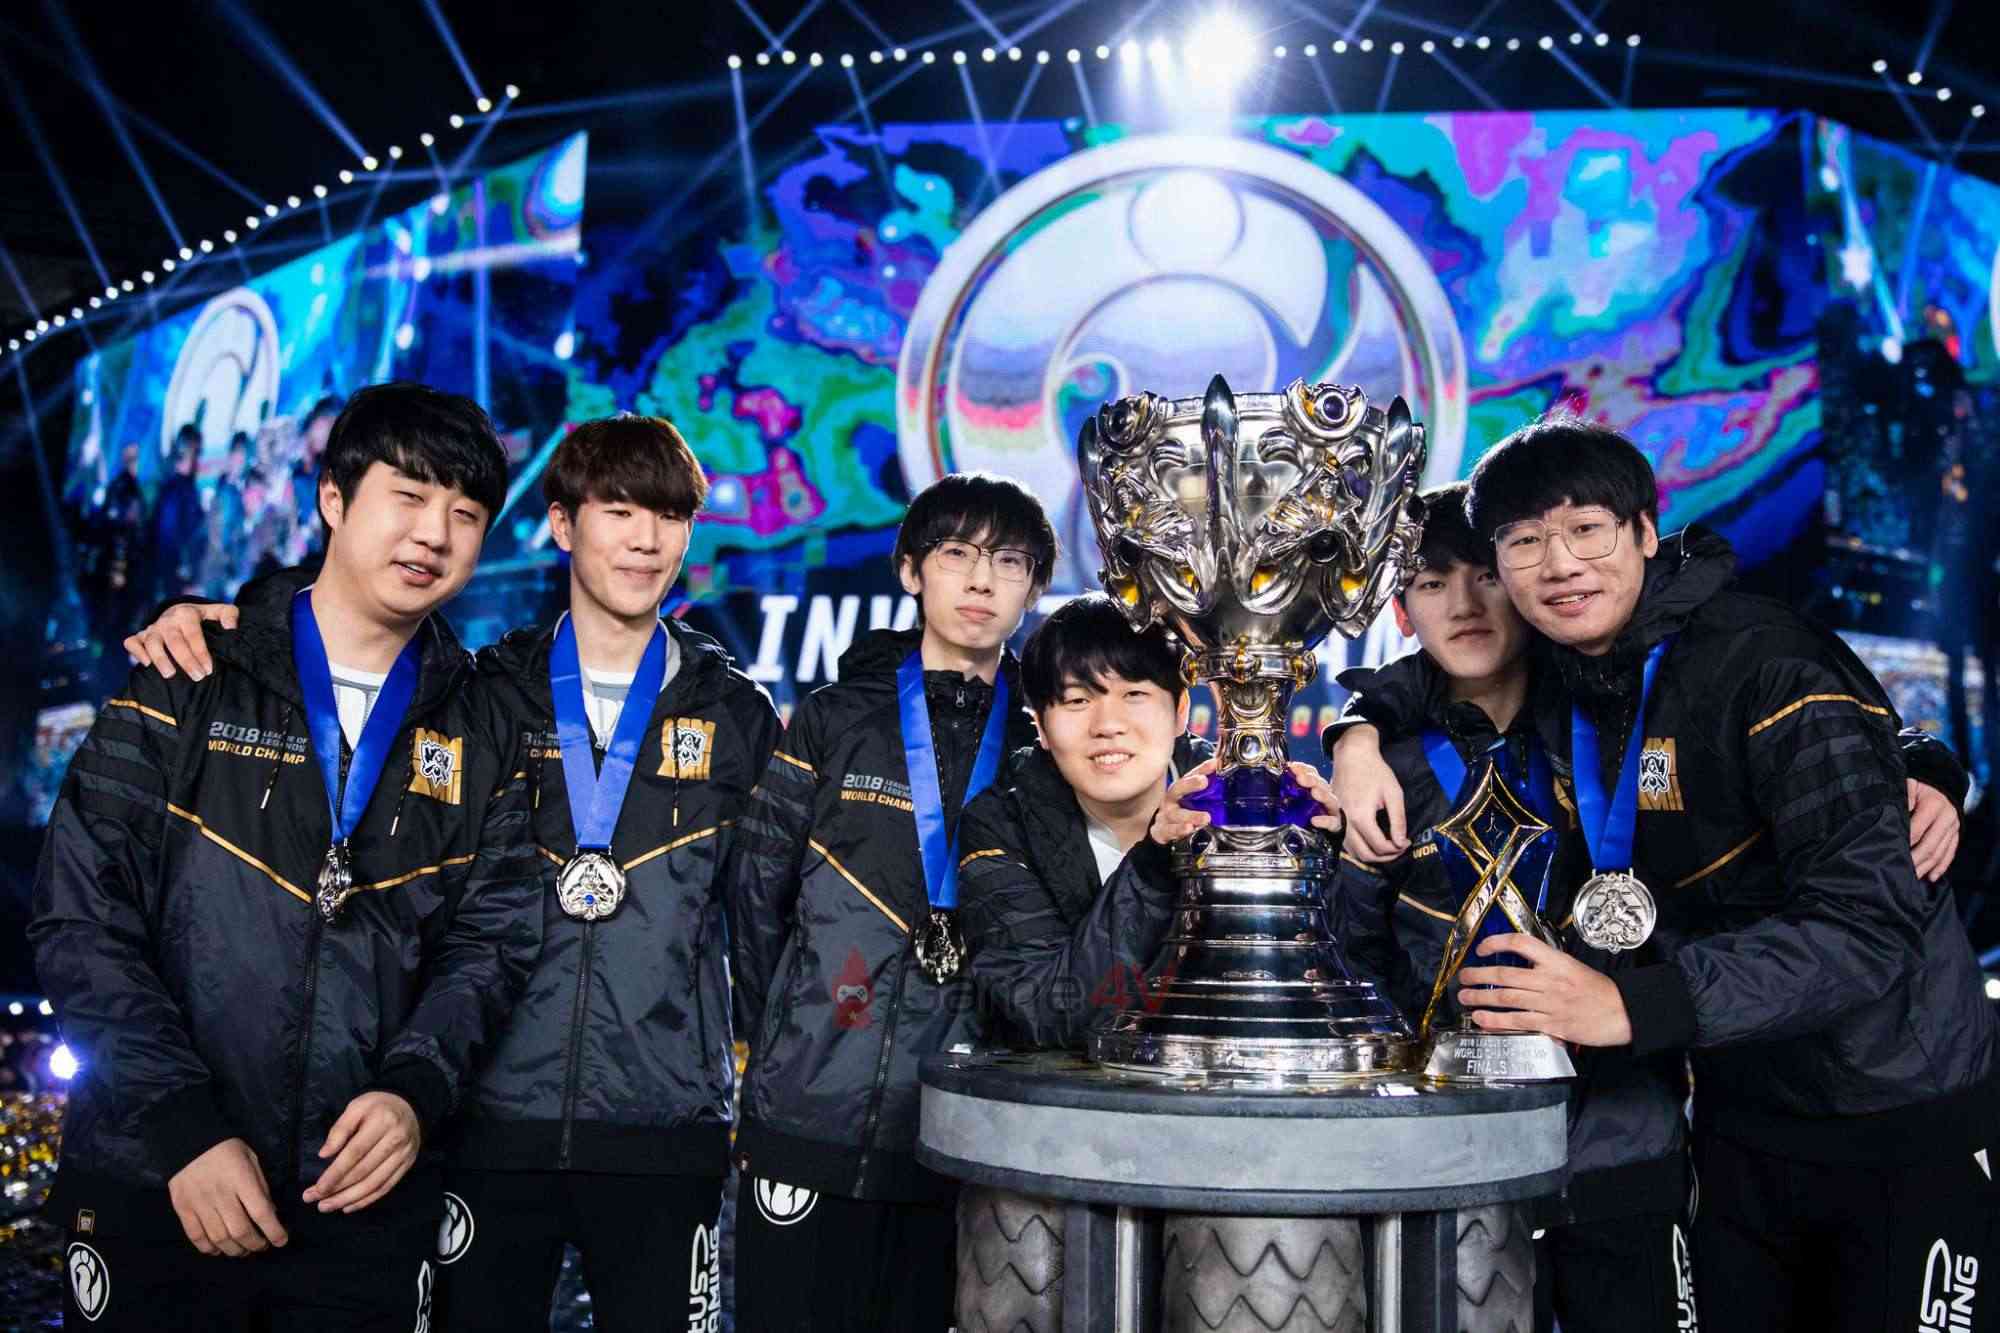 Except for Duke, members of Invictus Gaming 2018 all appeared in All-Star LPL 2023.